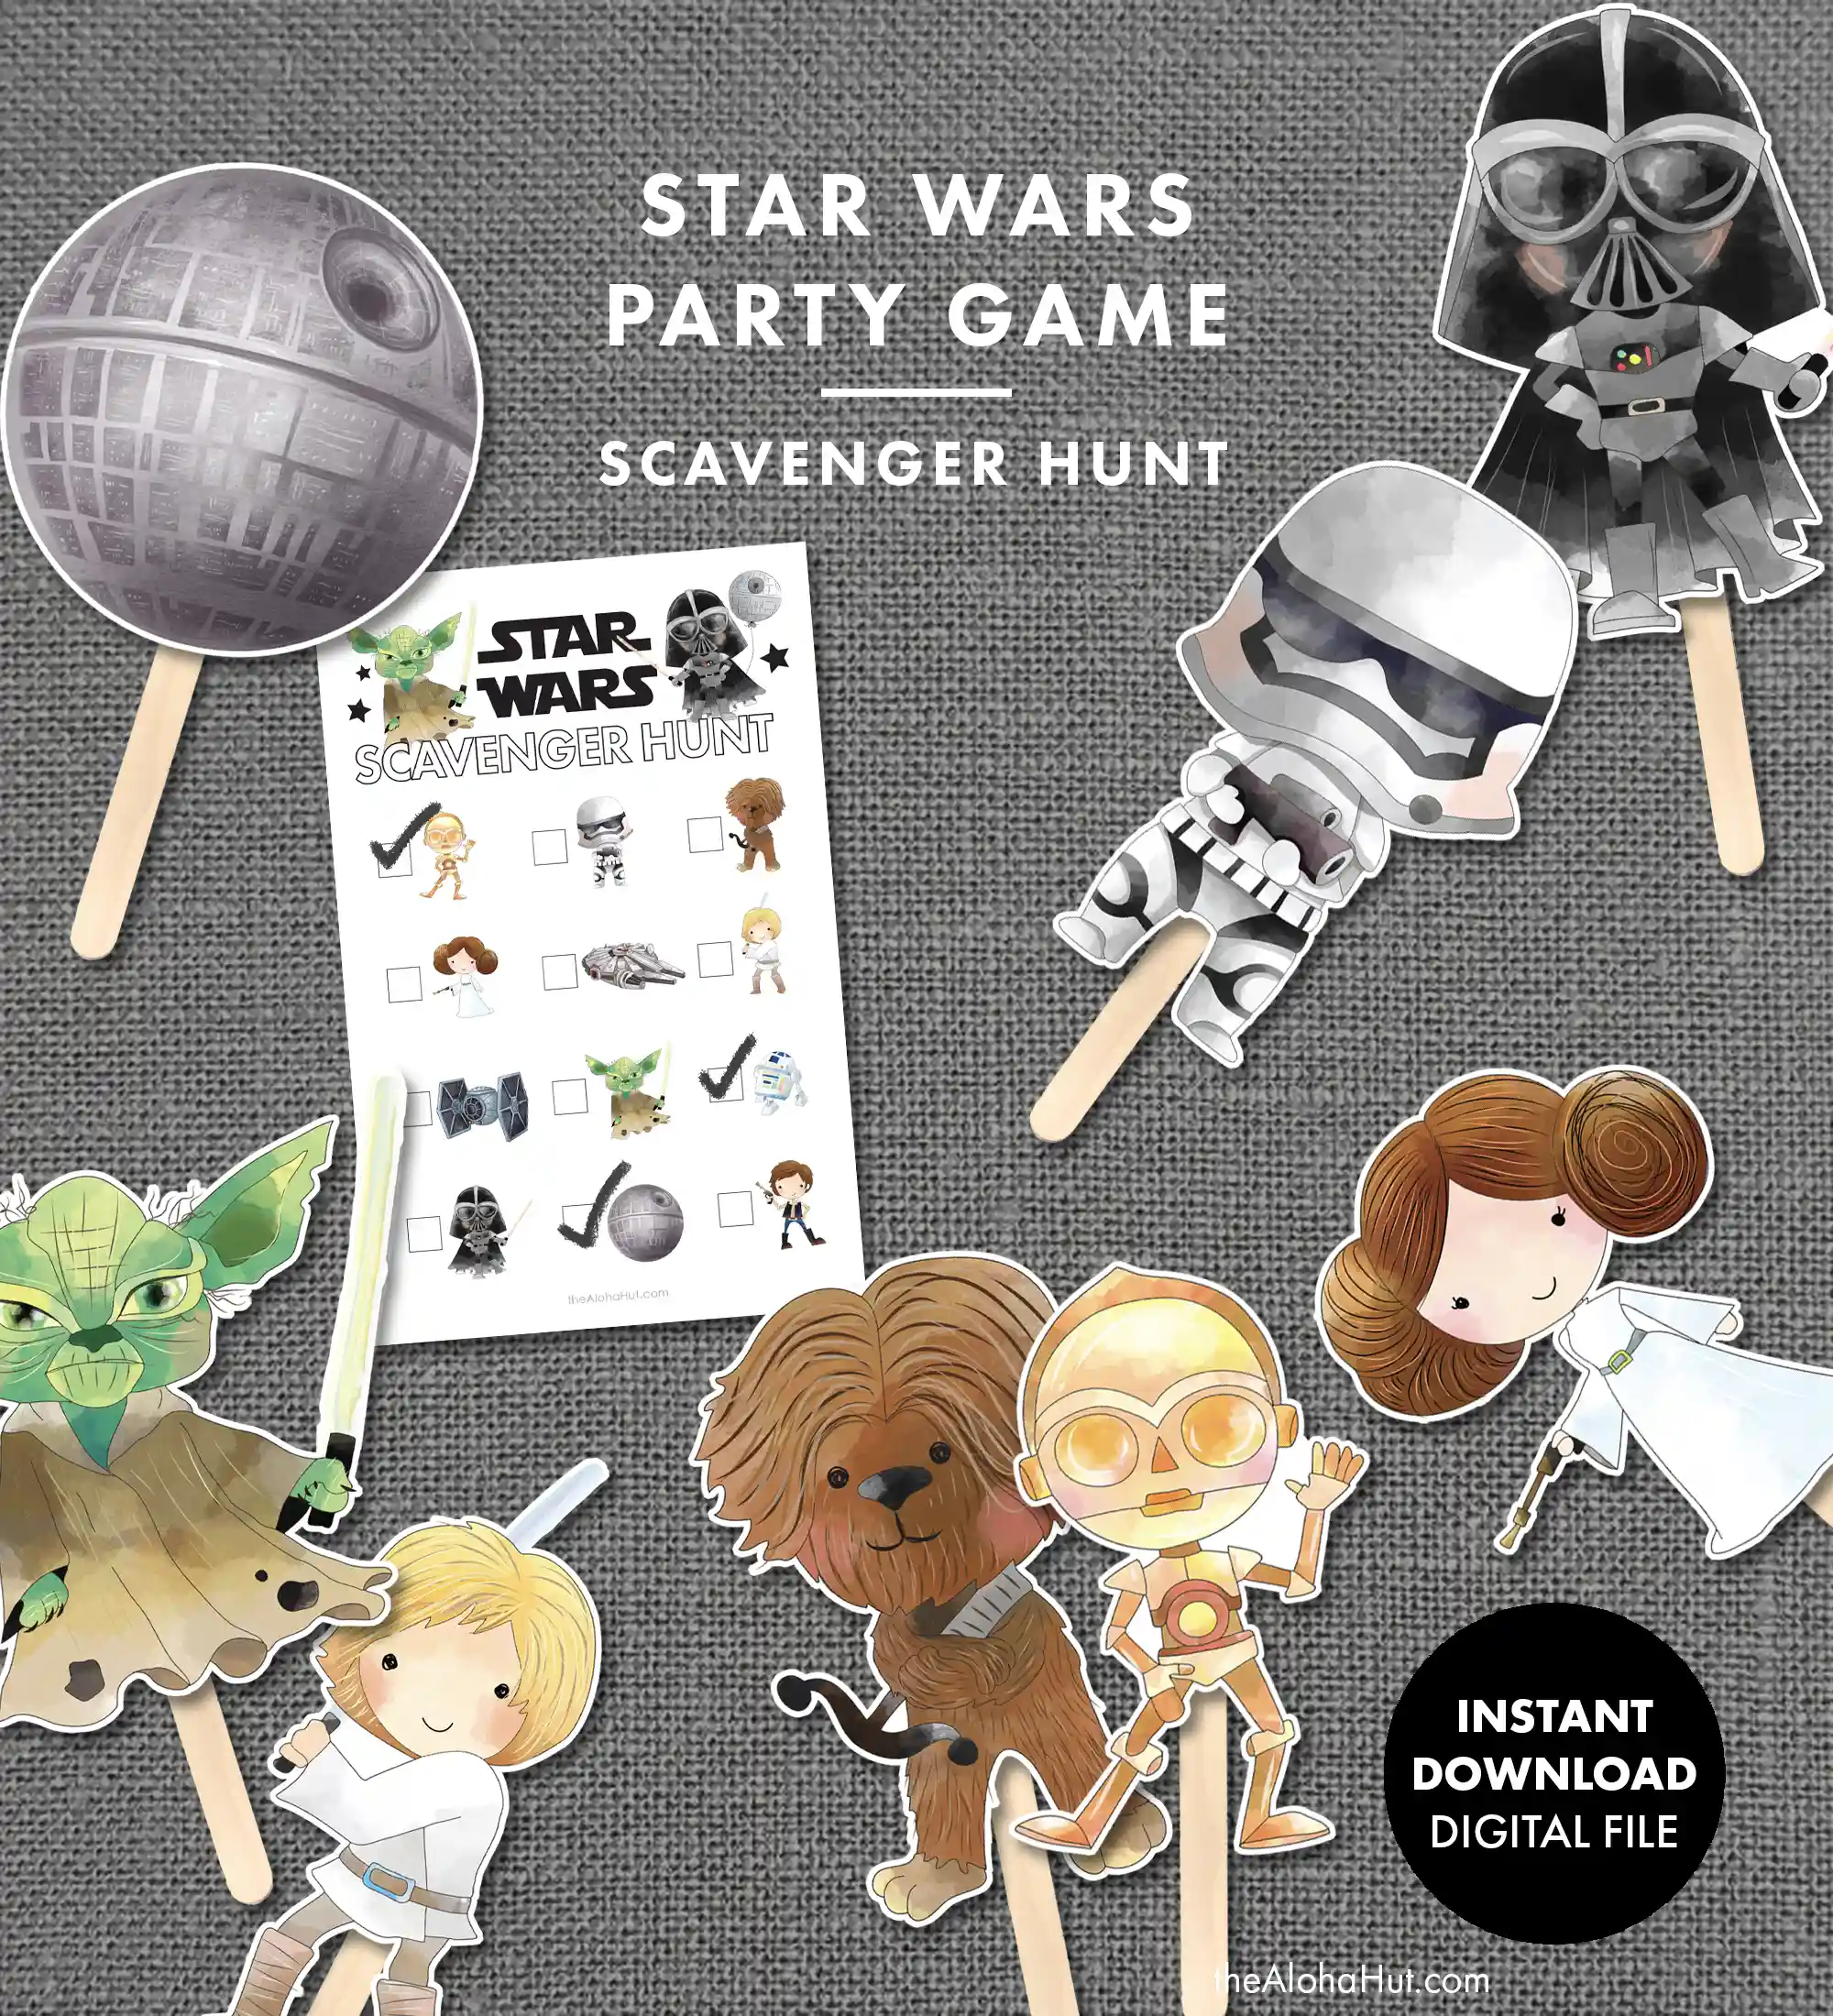 Star Wars party ideas, activities, birthday party games, decorations, and prints. Ideas and tips and tricks for throwing the best Star Wars themed kids birthday party, baby shower, or one with the force celebration. Includes Star Wars printable games, decorations (cupcake toppers, banners, gift tags, characters) and Star Wars party games (BINGO, scavenger hunt, pin the lightsaber on Yoda or Darth Vader).